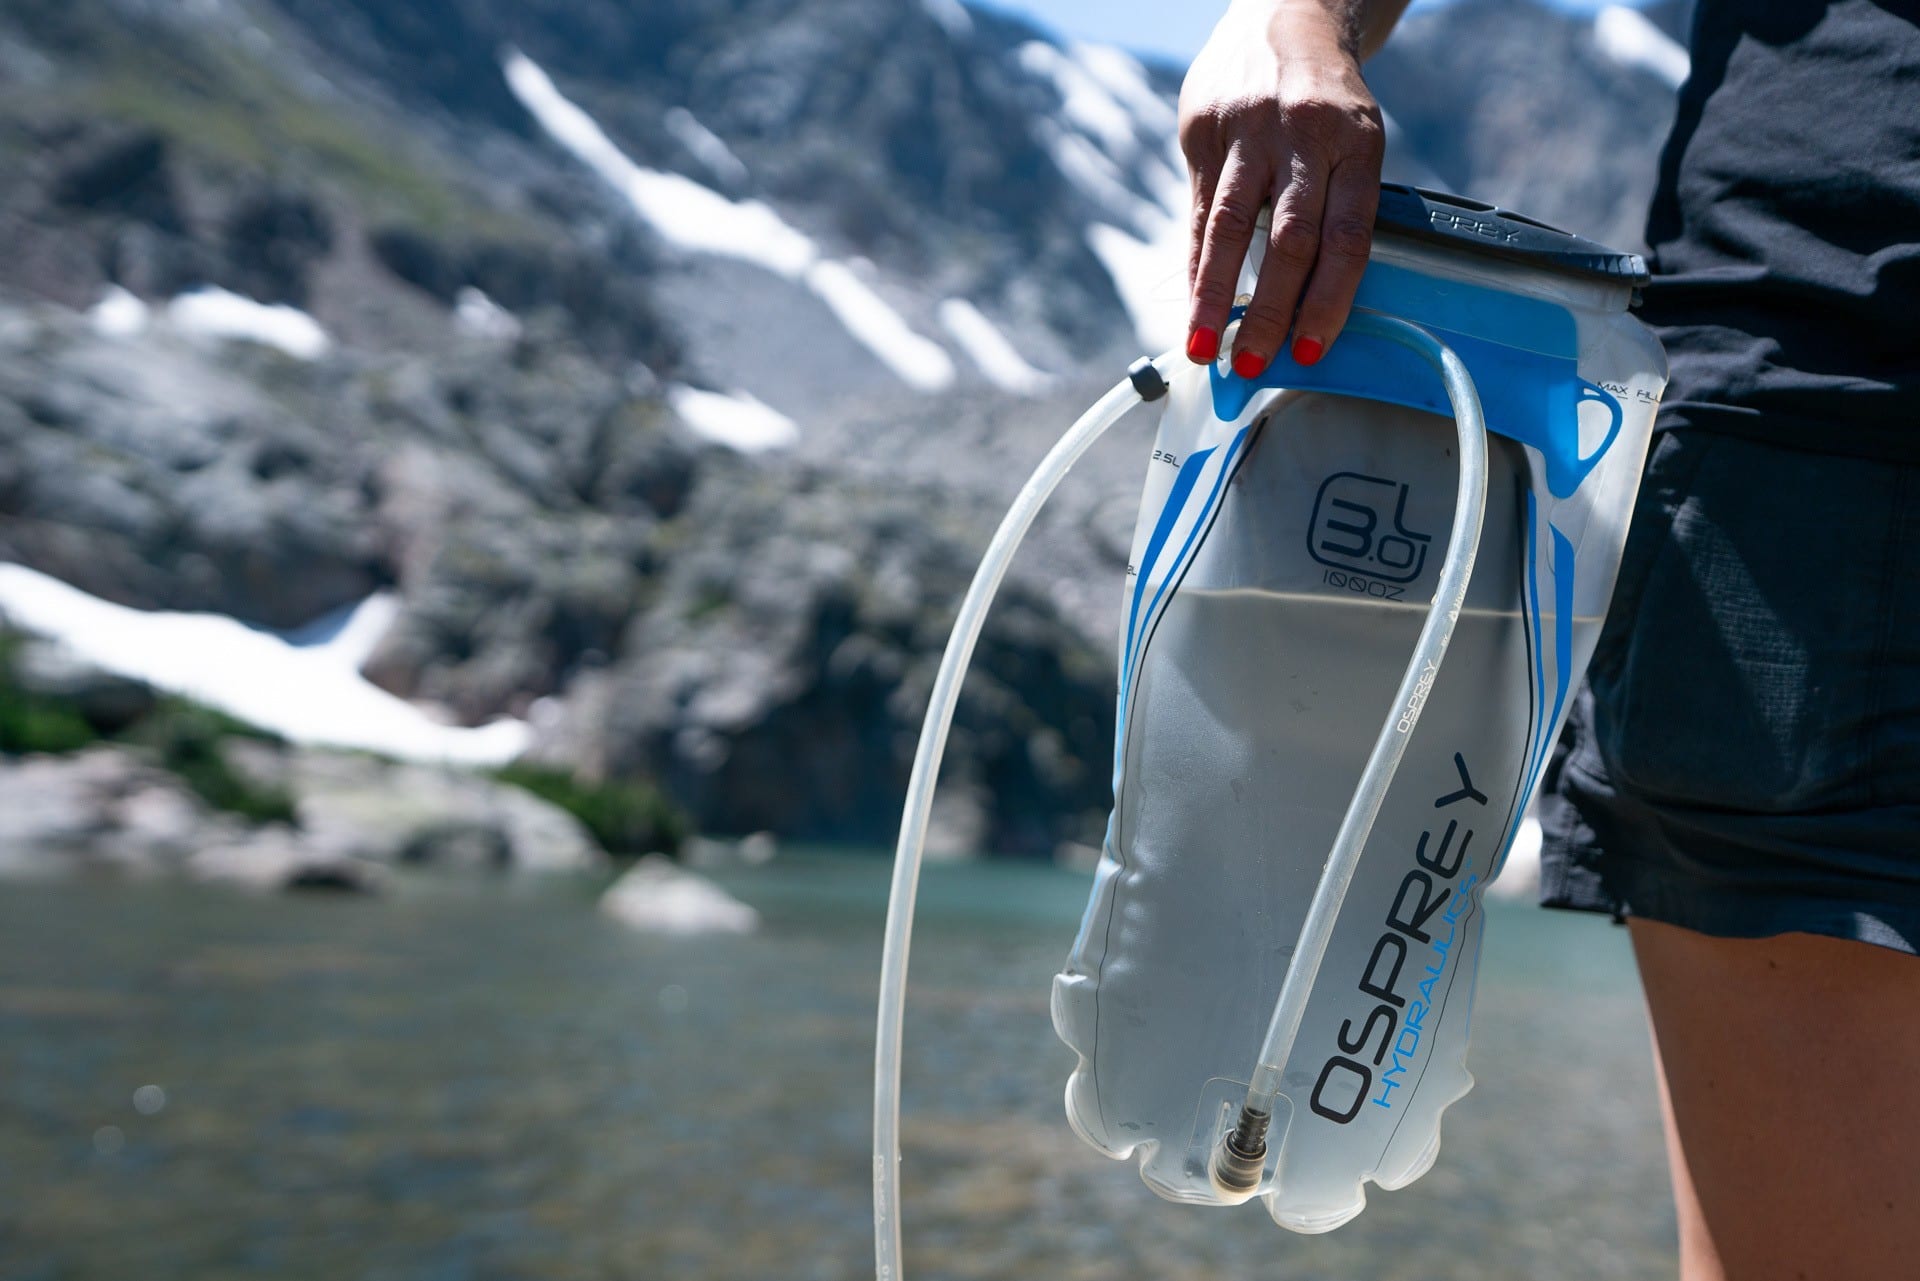 A person holds a Osprey hydration bladder by their side